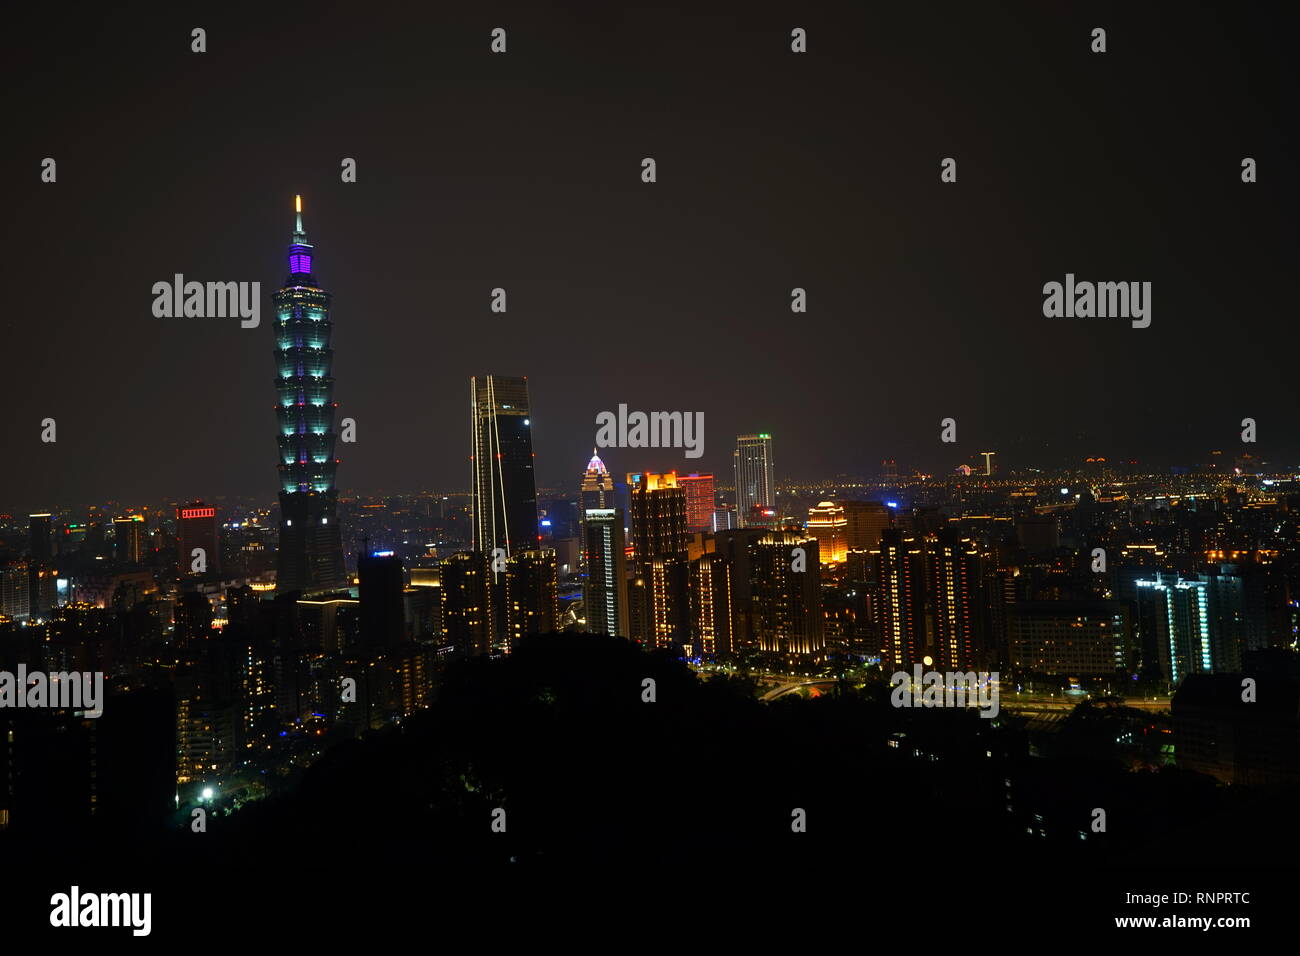 The aerial night view of the Taipei 101 from Elephant moutain (Xiangshan) in Taiwan. The concept of friendly and convenient lifestyle for real estate. Stock Photo